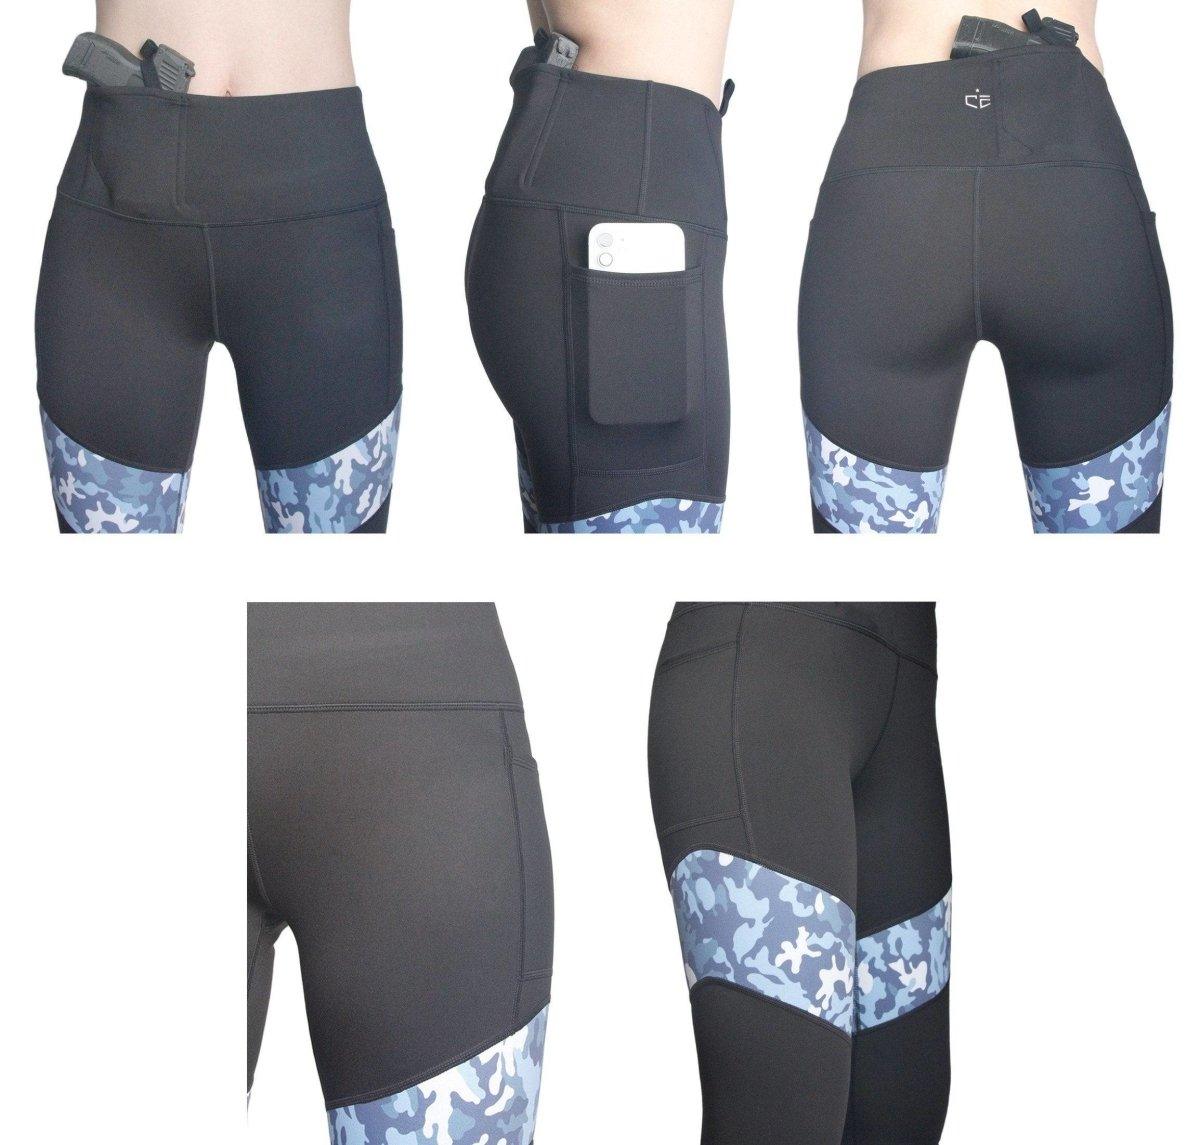 Gray Concealed Carry Leggings- Right Hand Only - C4